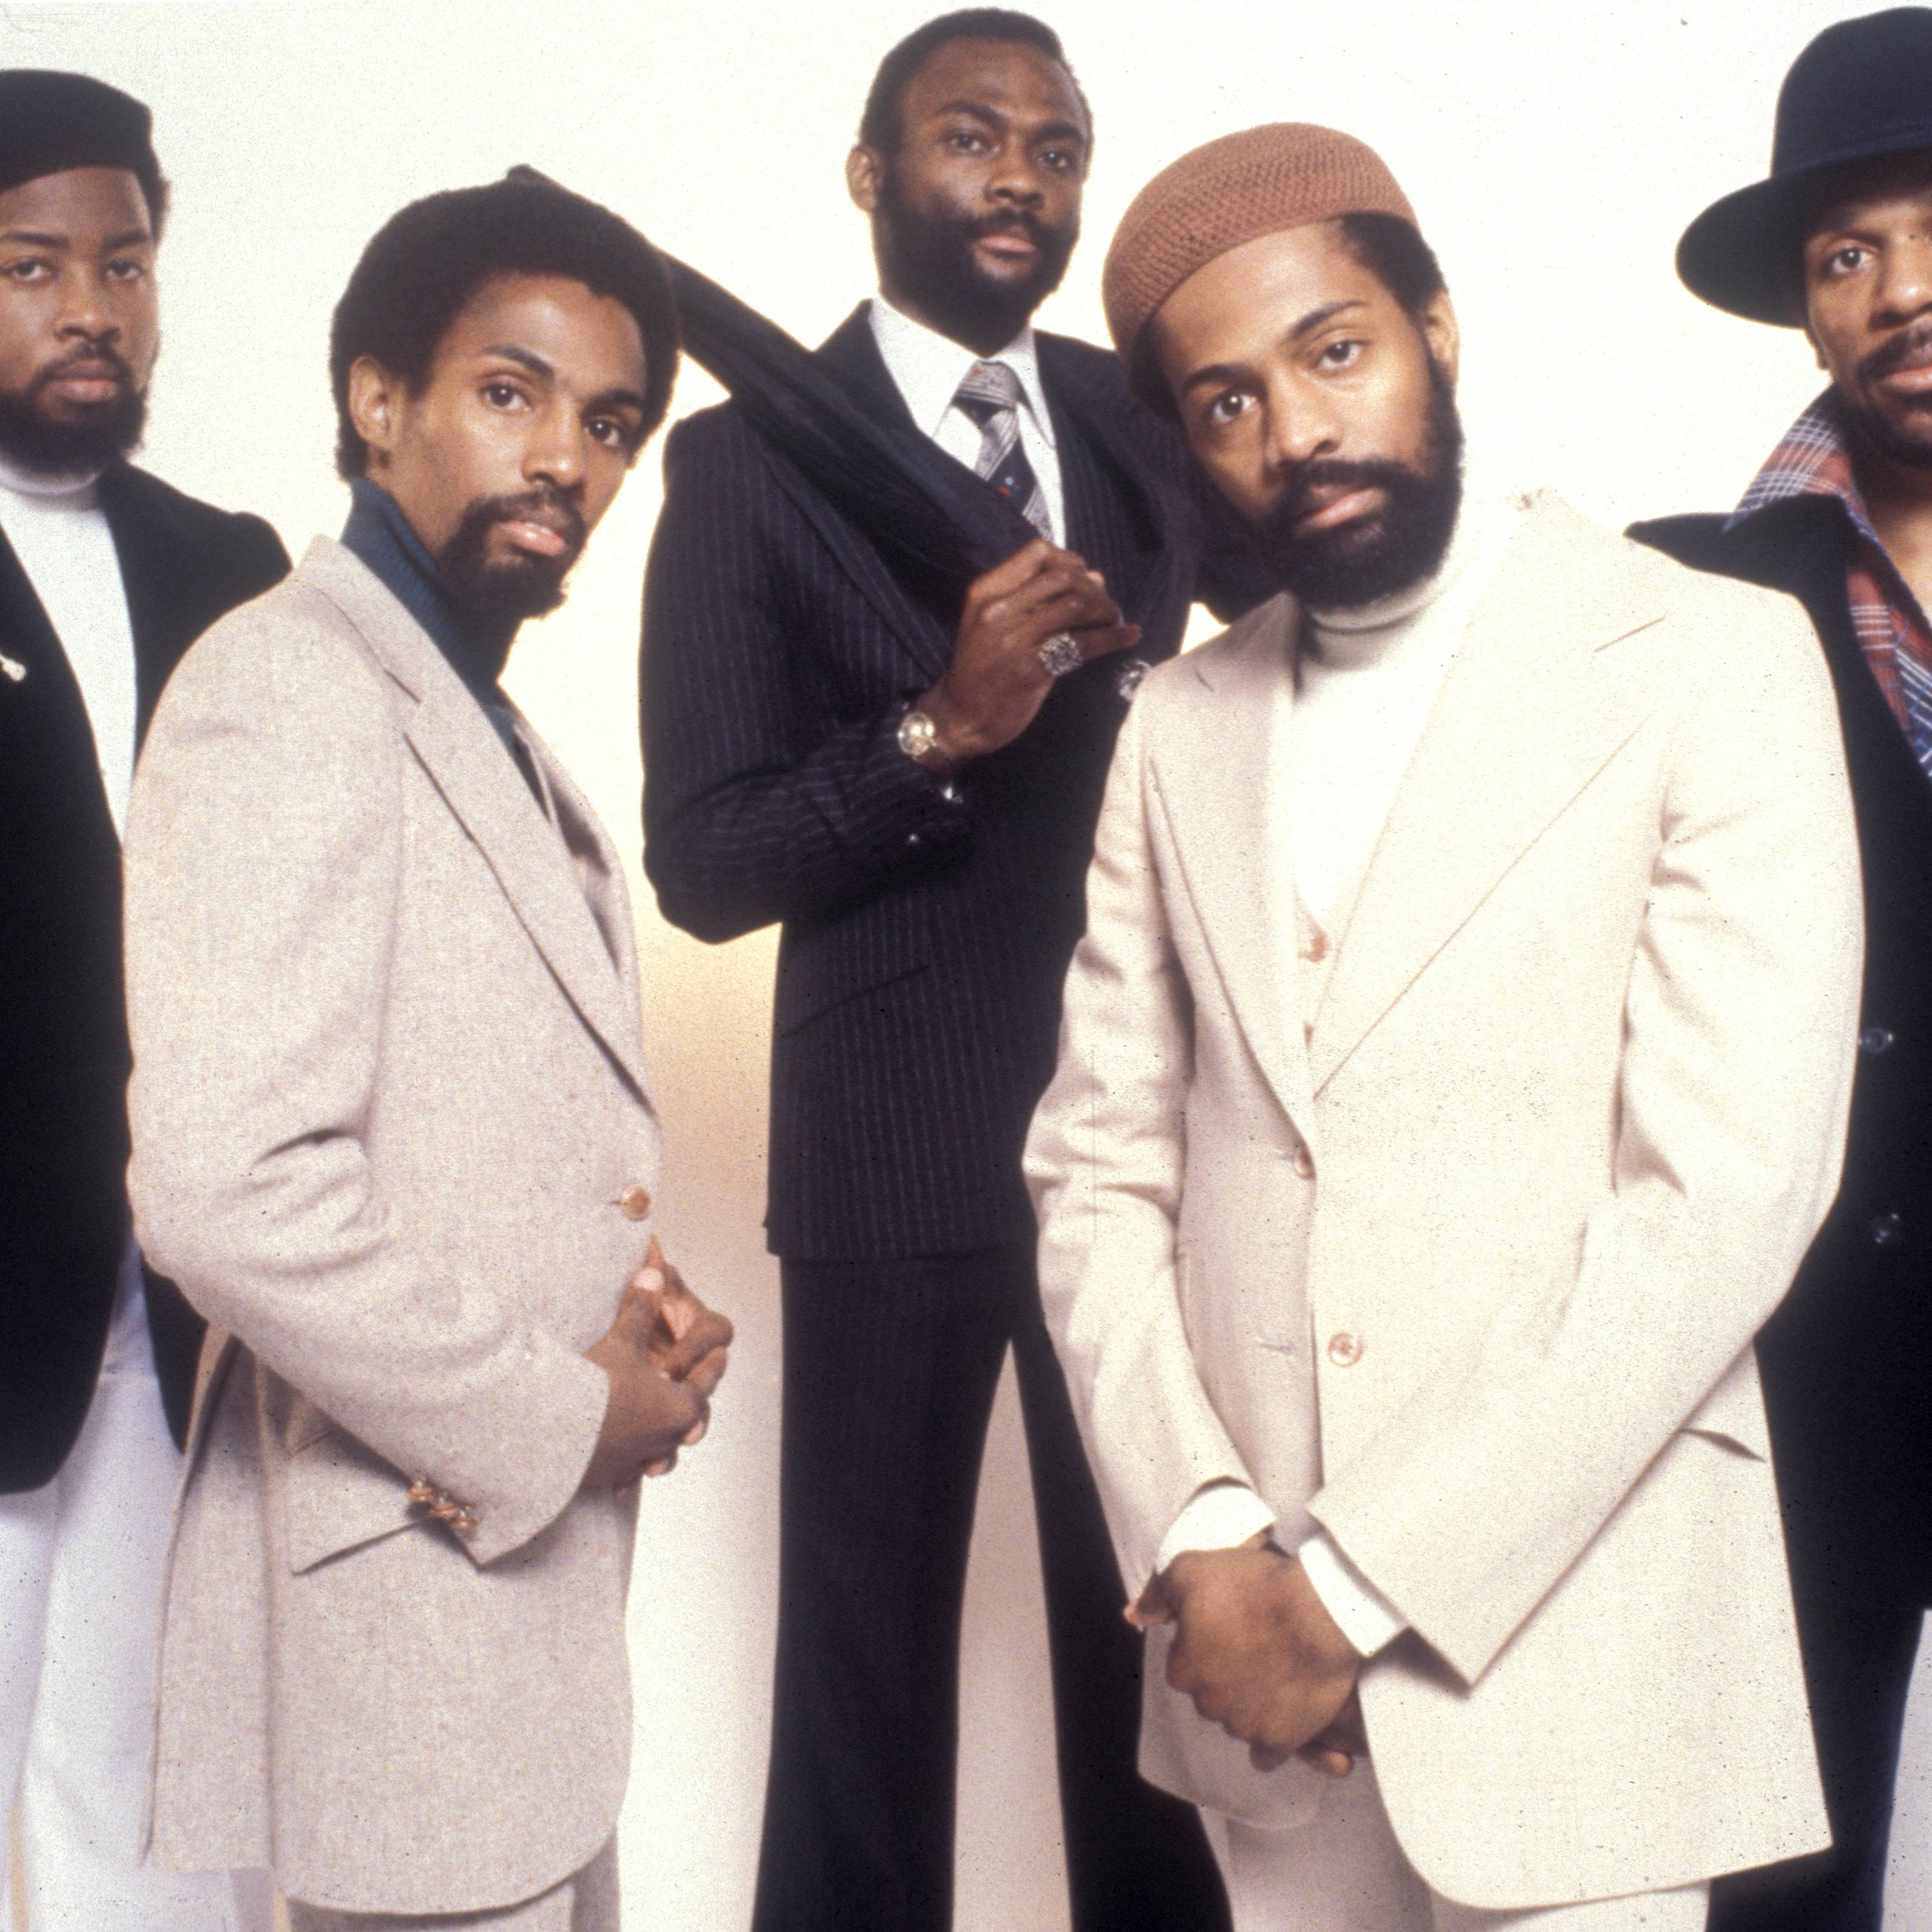 Kool & the Gang's 10 greatest songs ever - Smooth